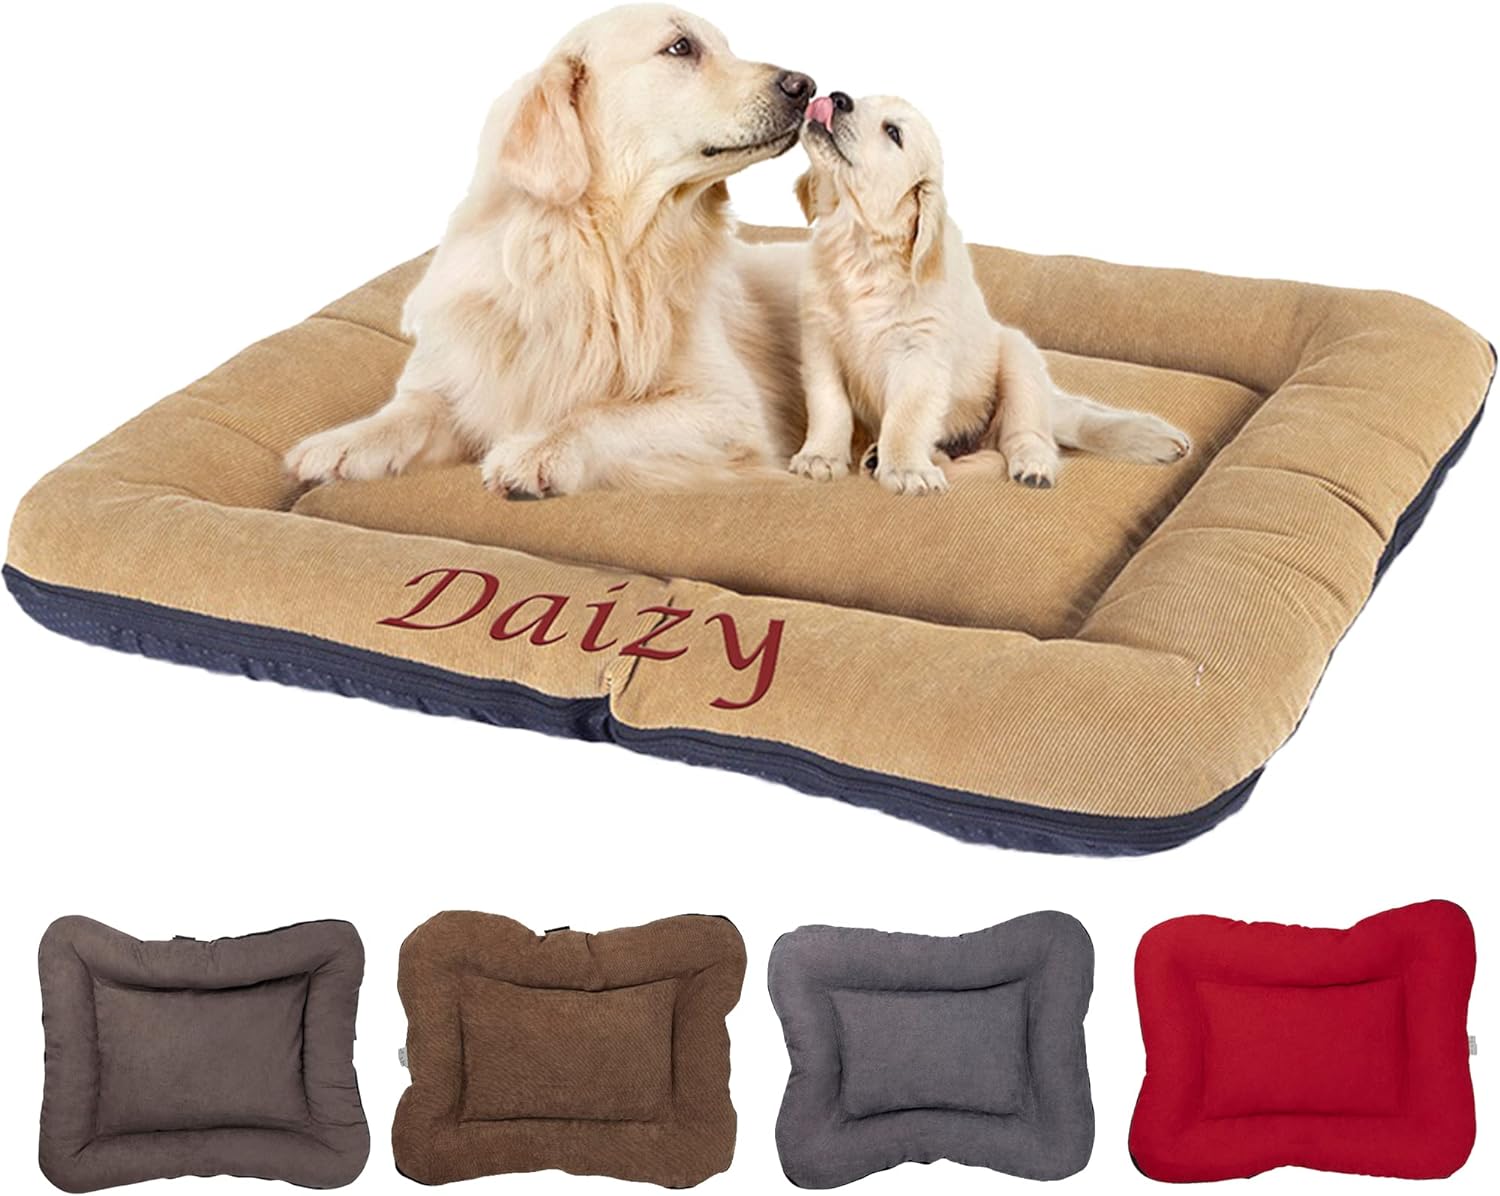 Personalized Passion Dog Bed